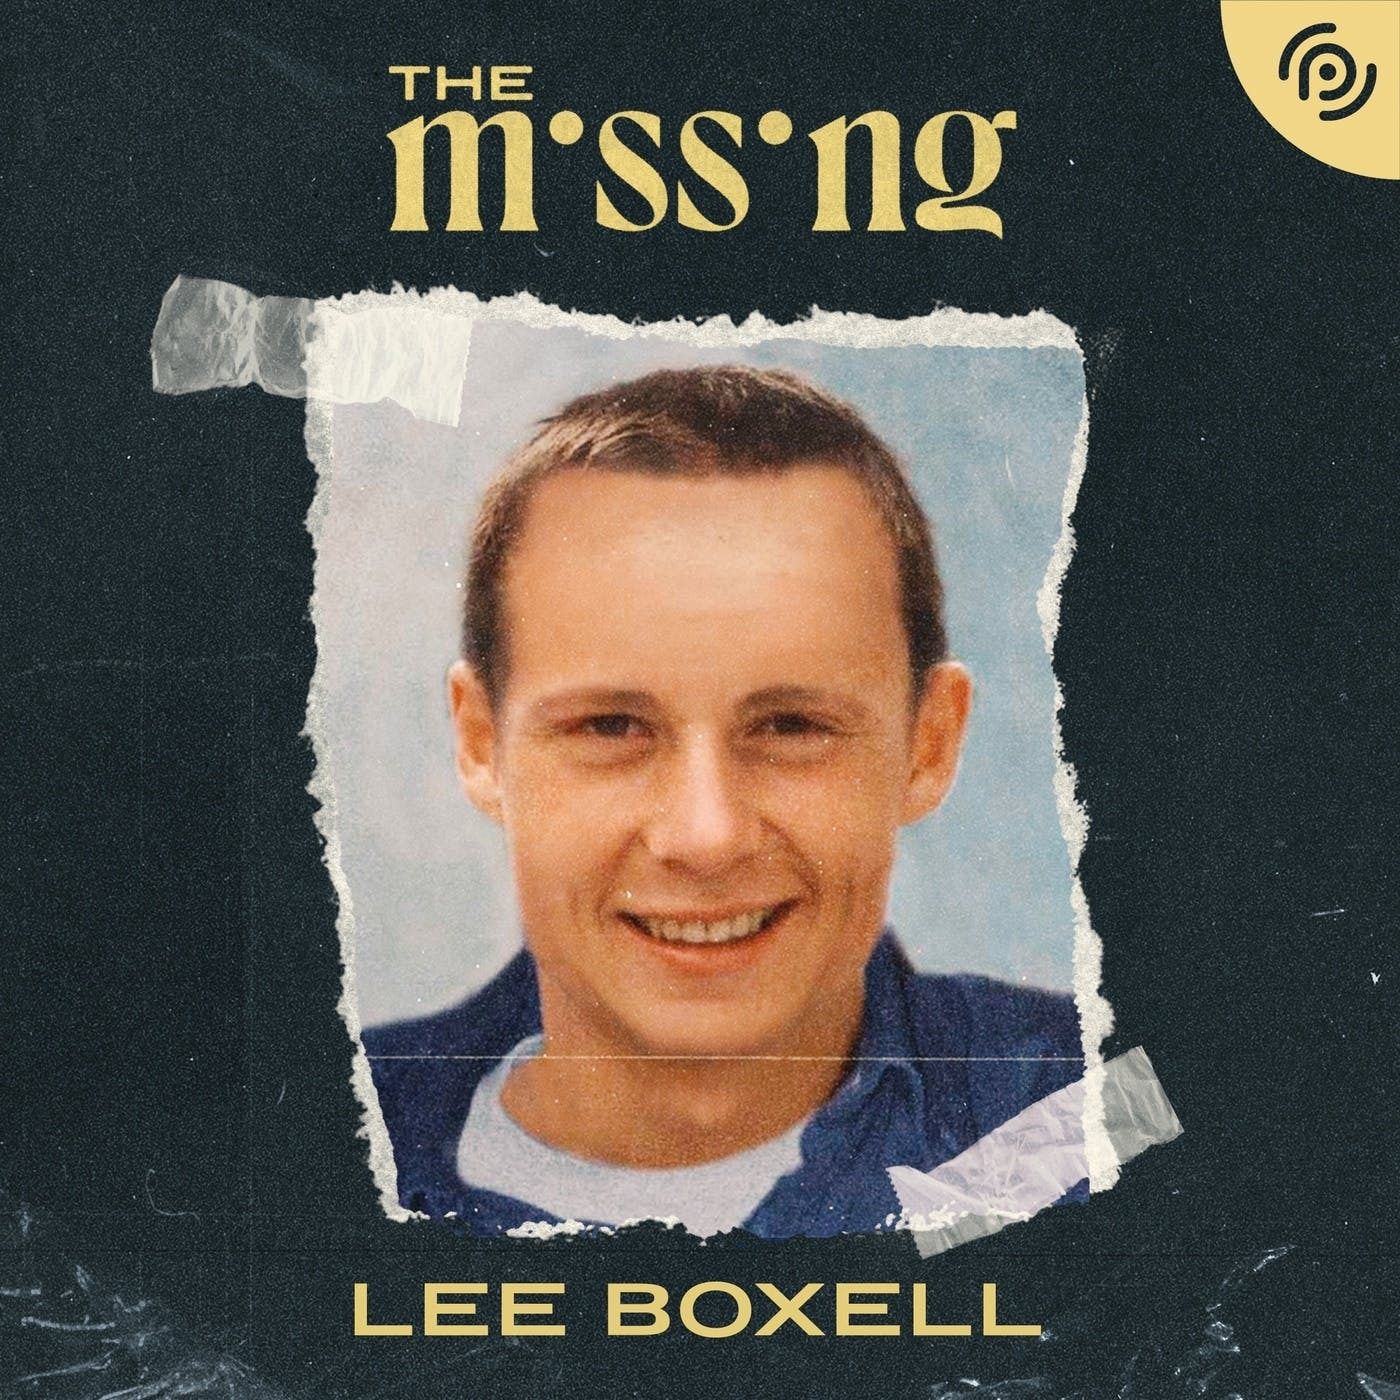 Lee Boxell